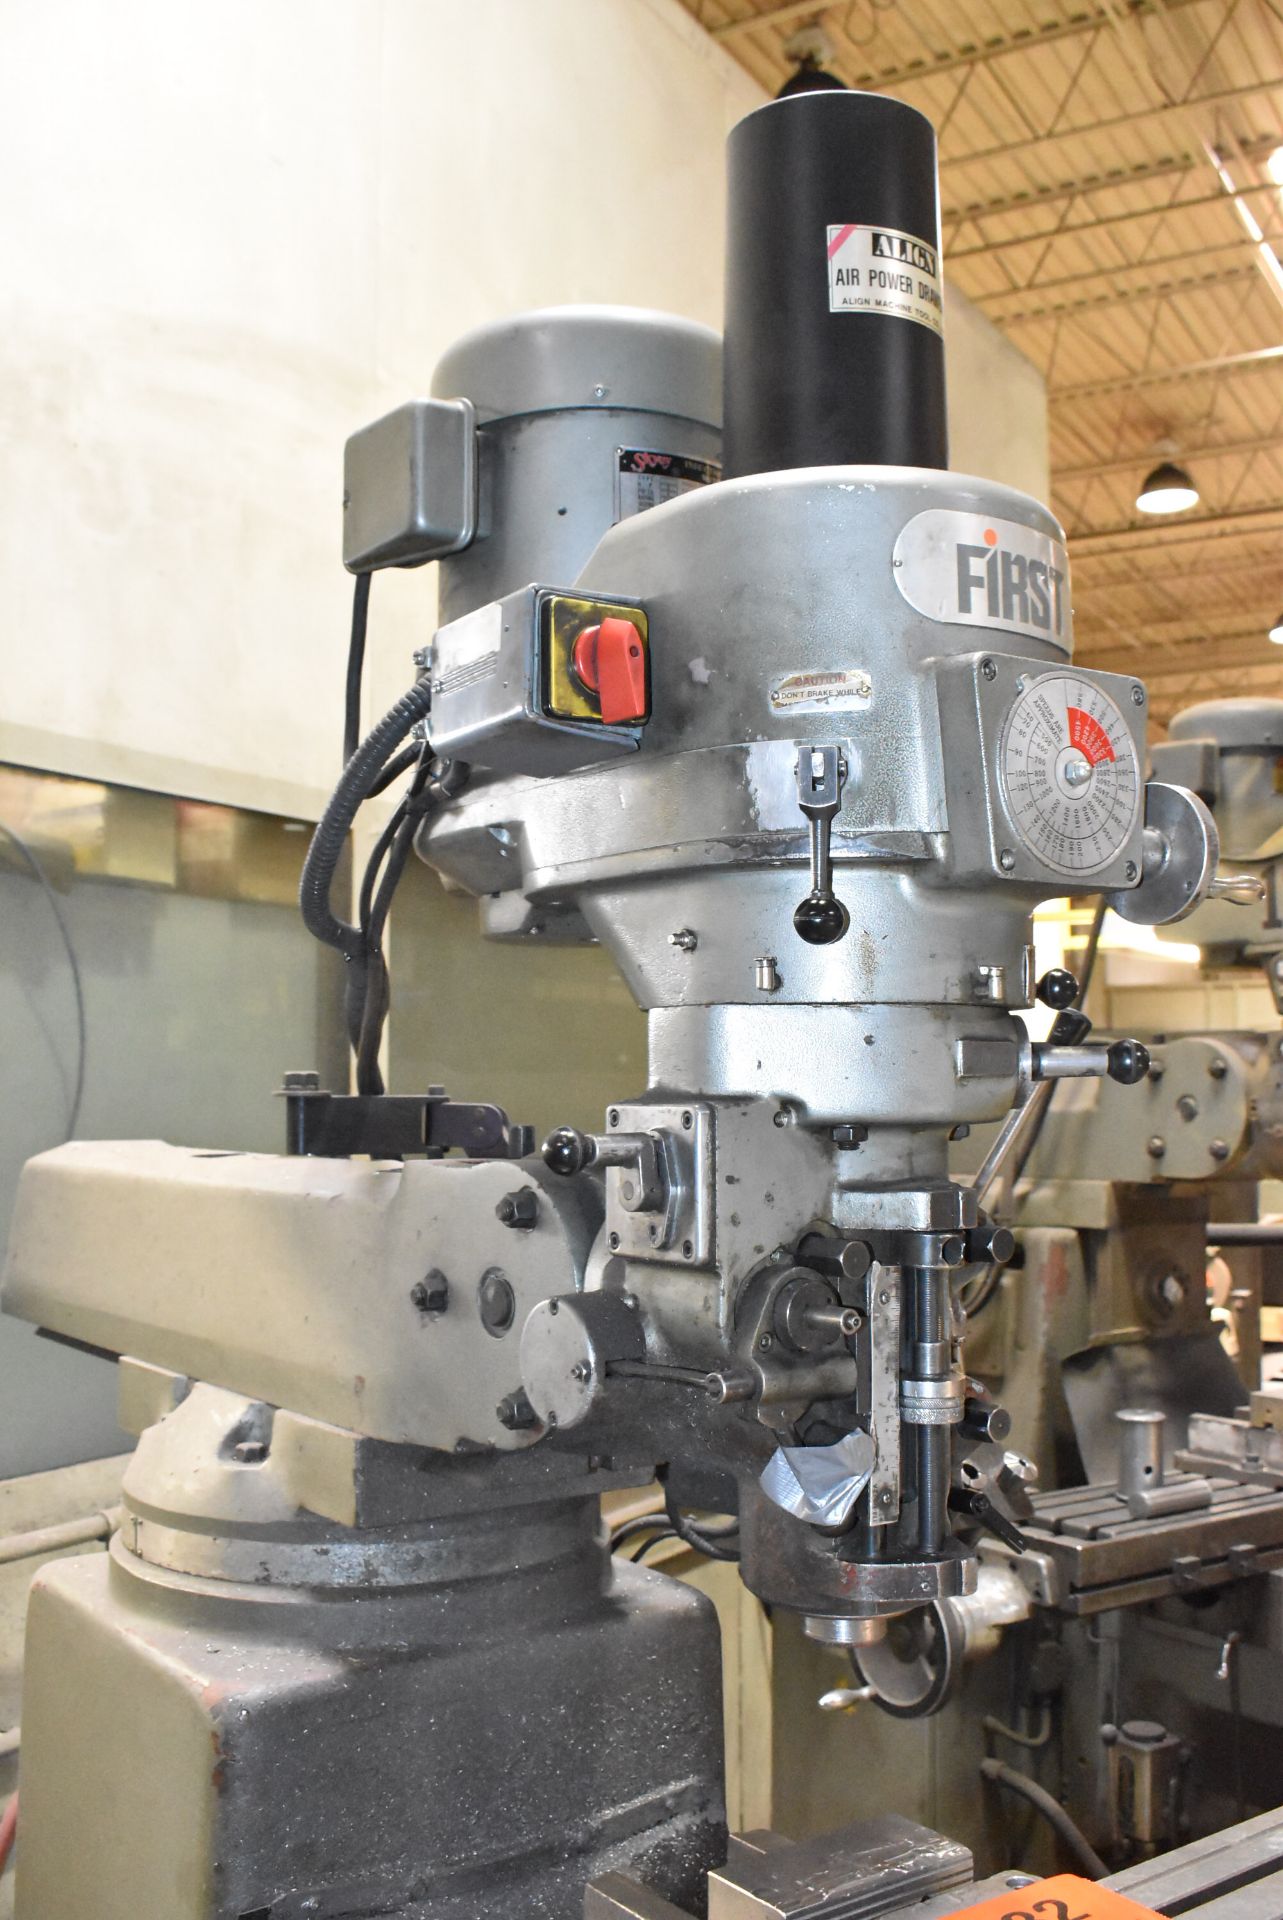 FIRST LC-185VS VERTICAL MILLING MACHINES WITH 50"X10" TABLE, SPEEDS TO 4500 RPM, ALIGN AIR POWER - Image 6 of 7